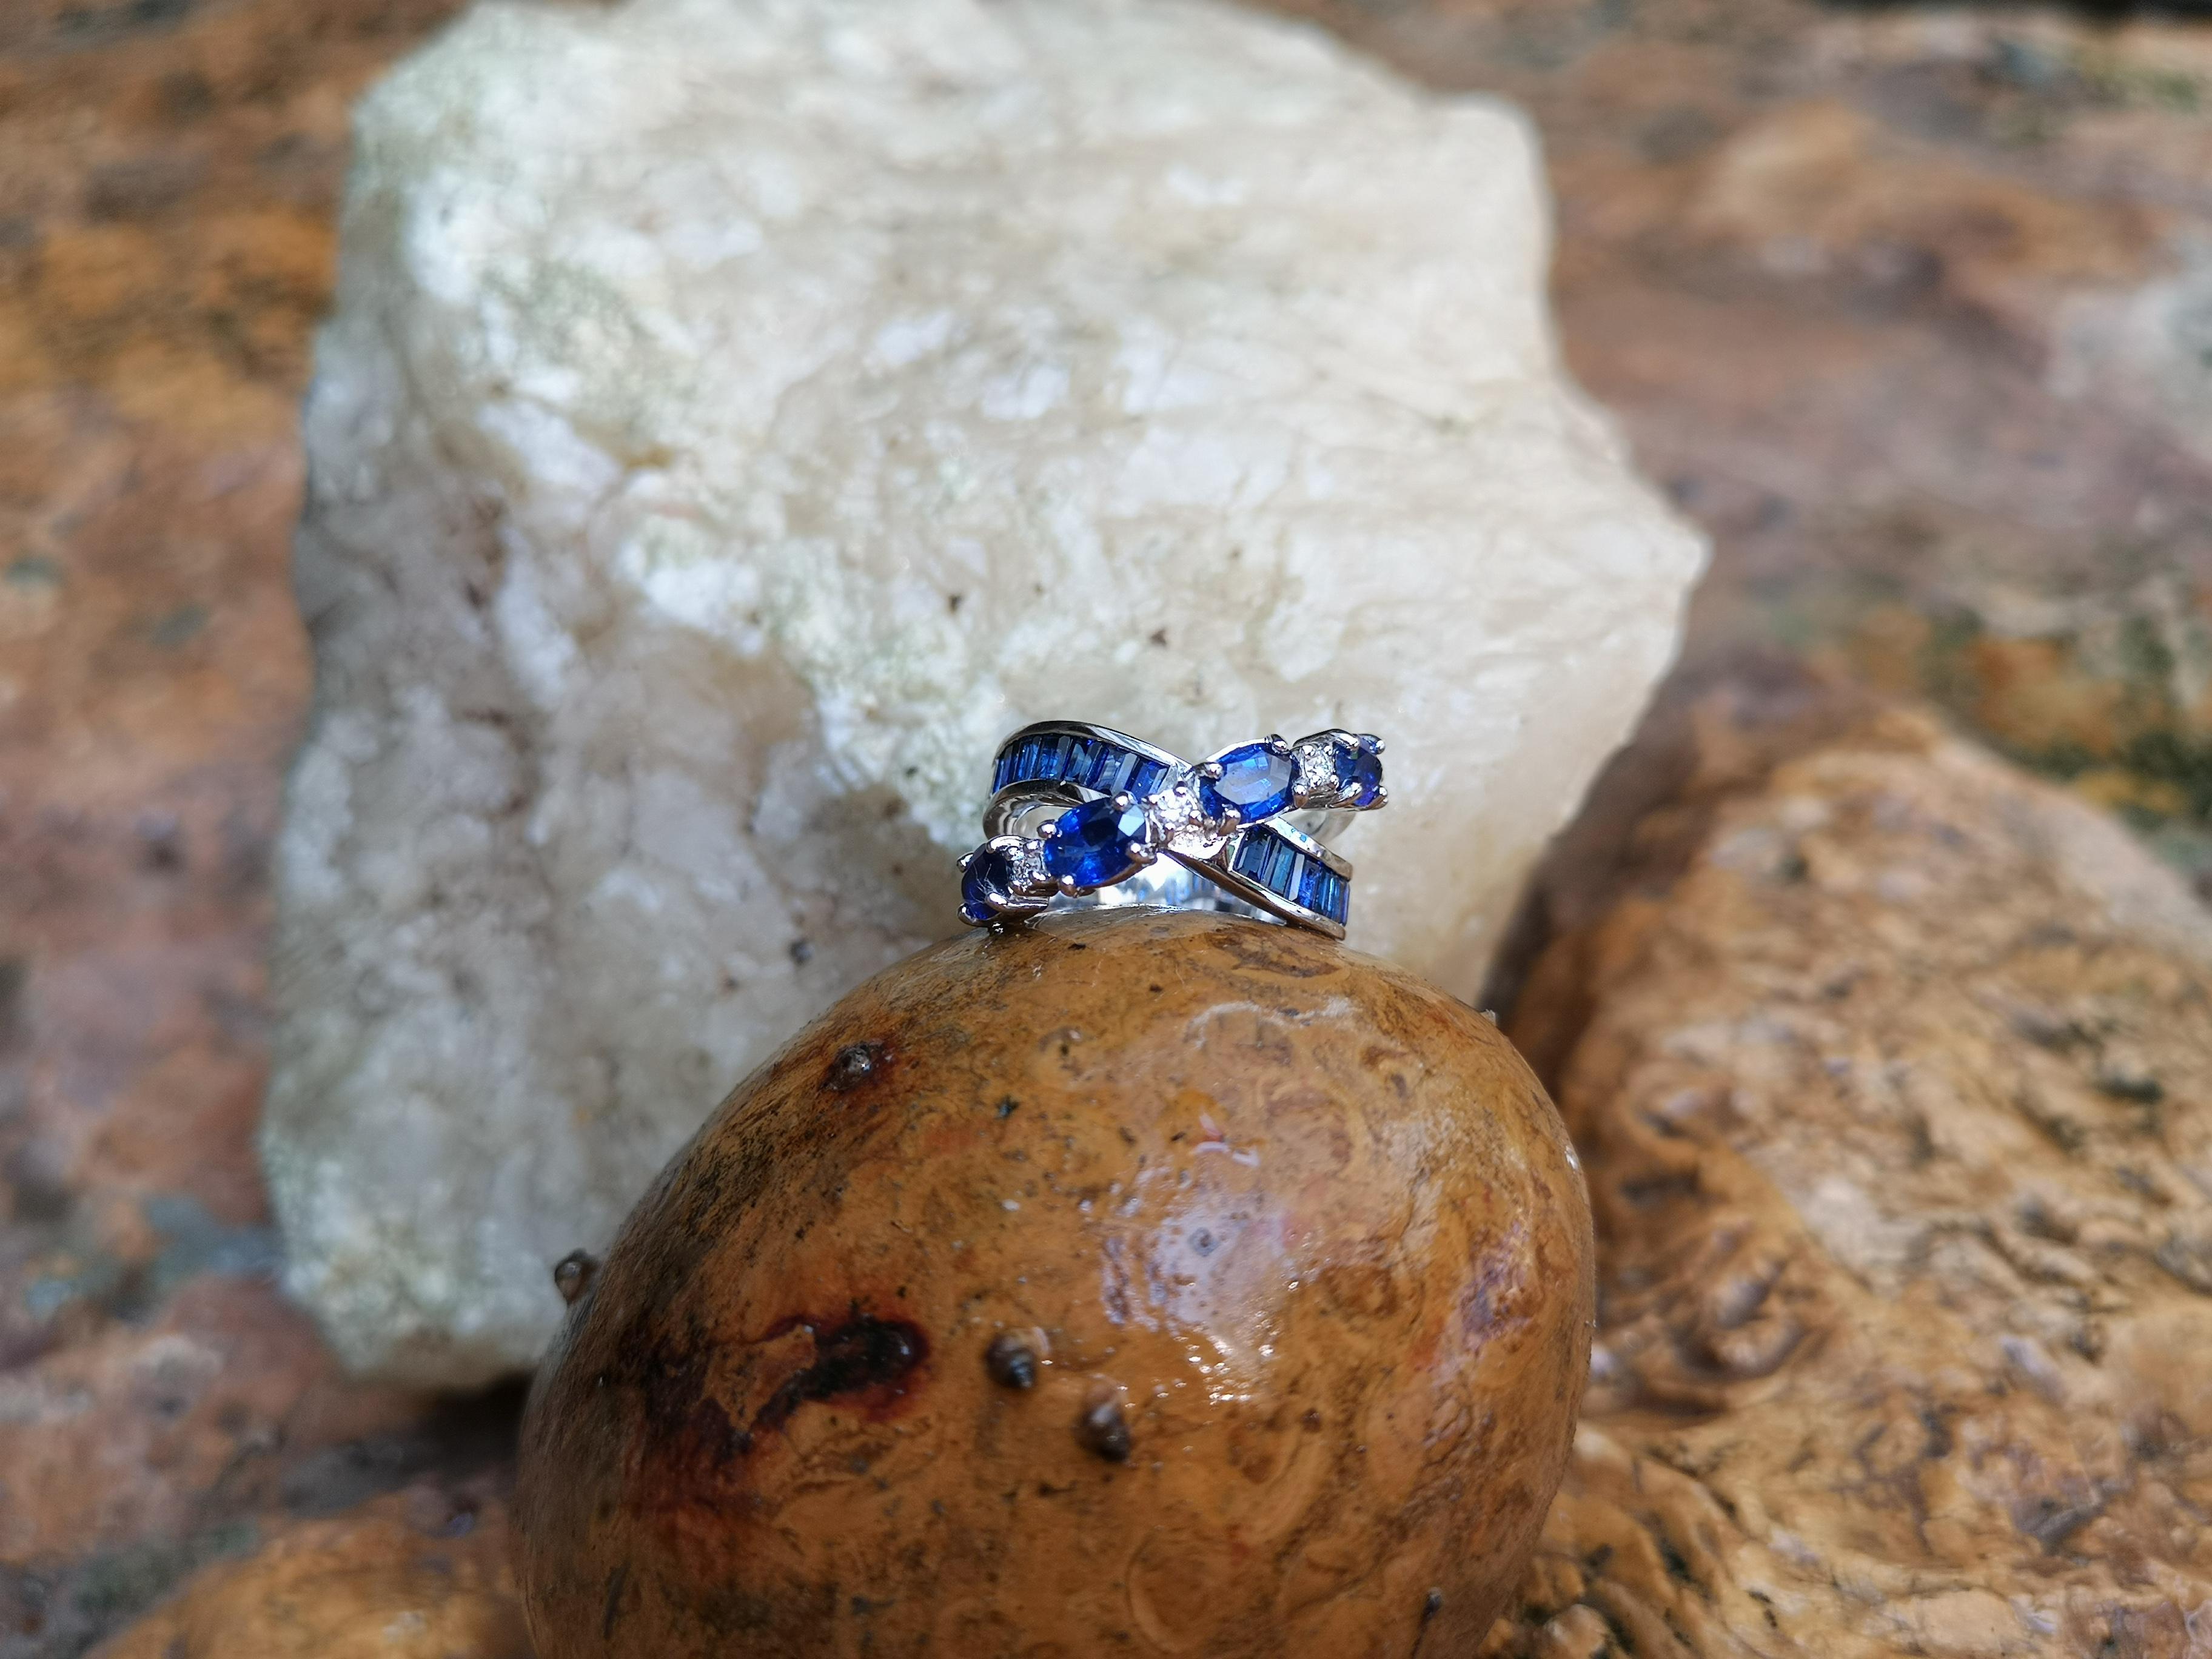 Blue Sapphire 3.7 carats with Diamond 0.10 carat Ring set in 18 Karat White Gold Settings

Width: 2.0 cm
Length: 1.0 cm 
Ring Size: 54

